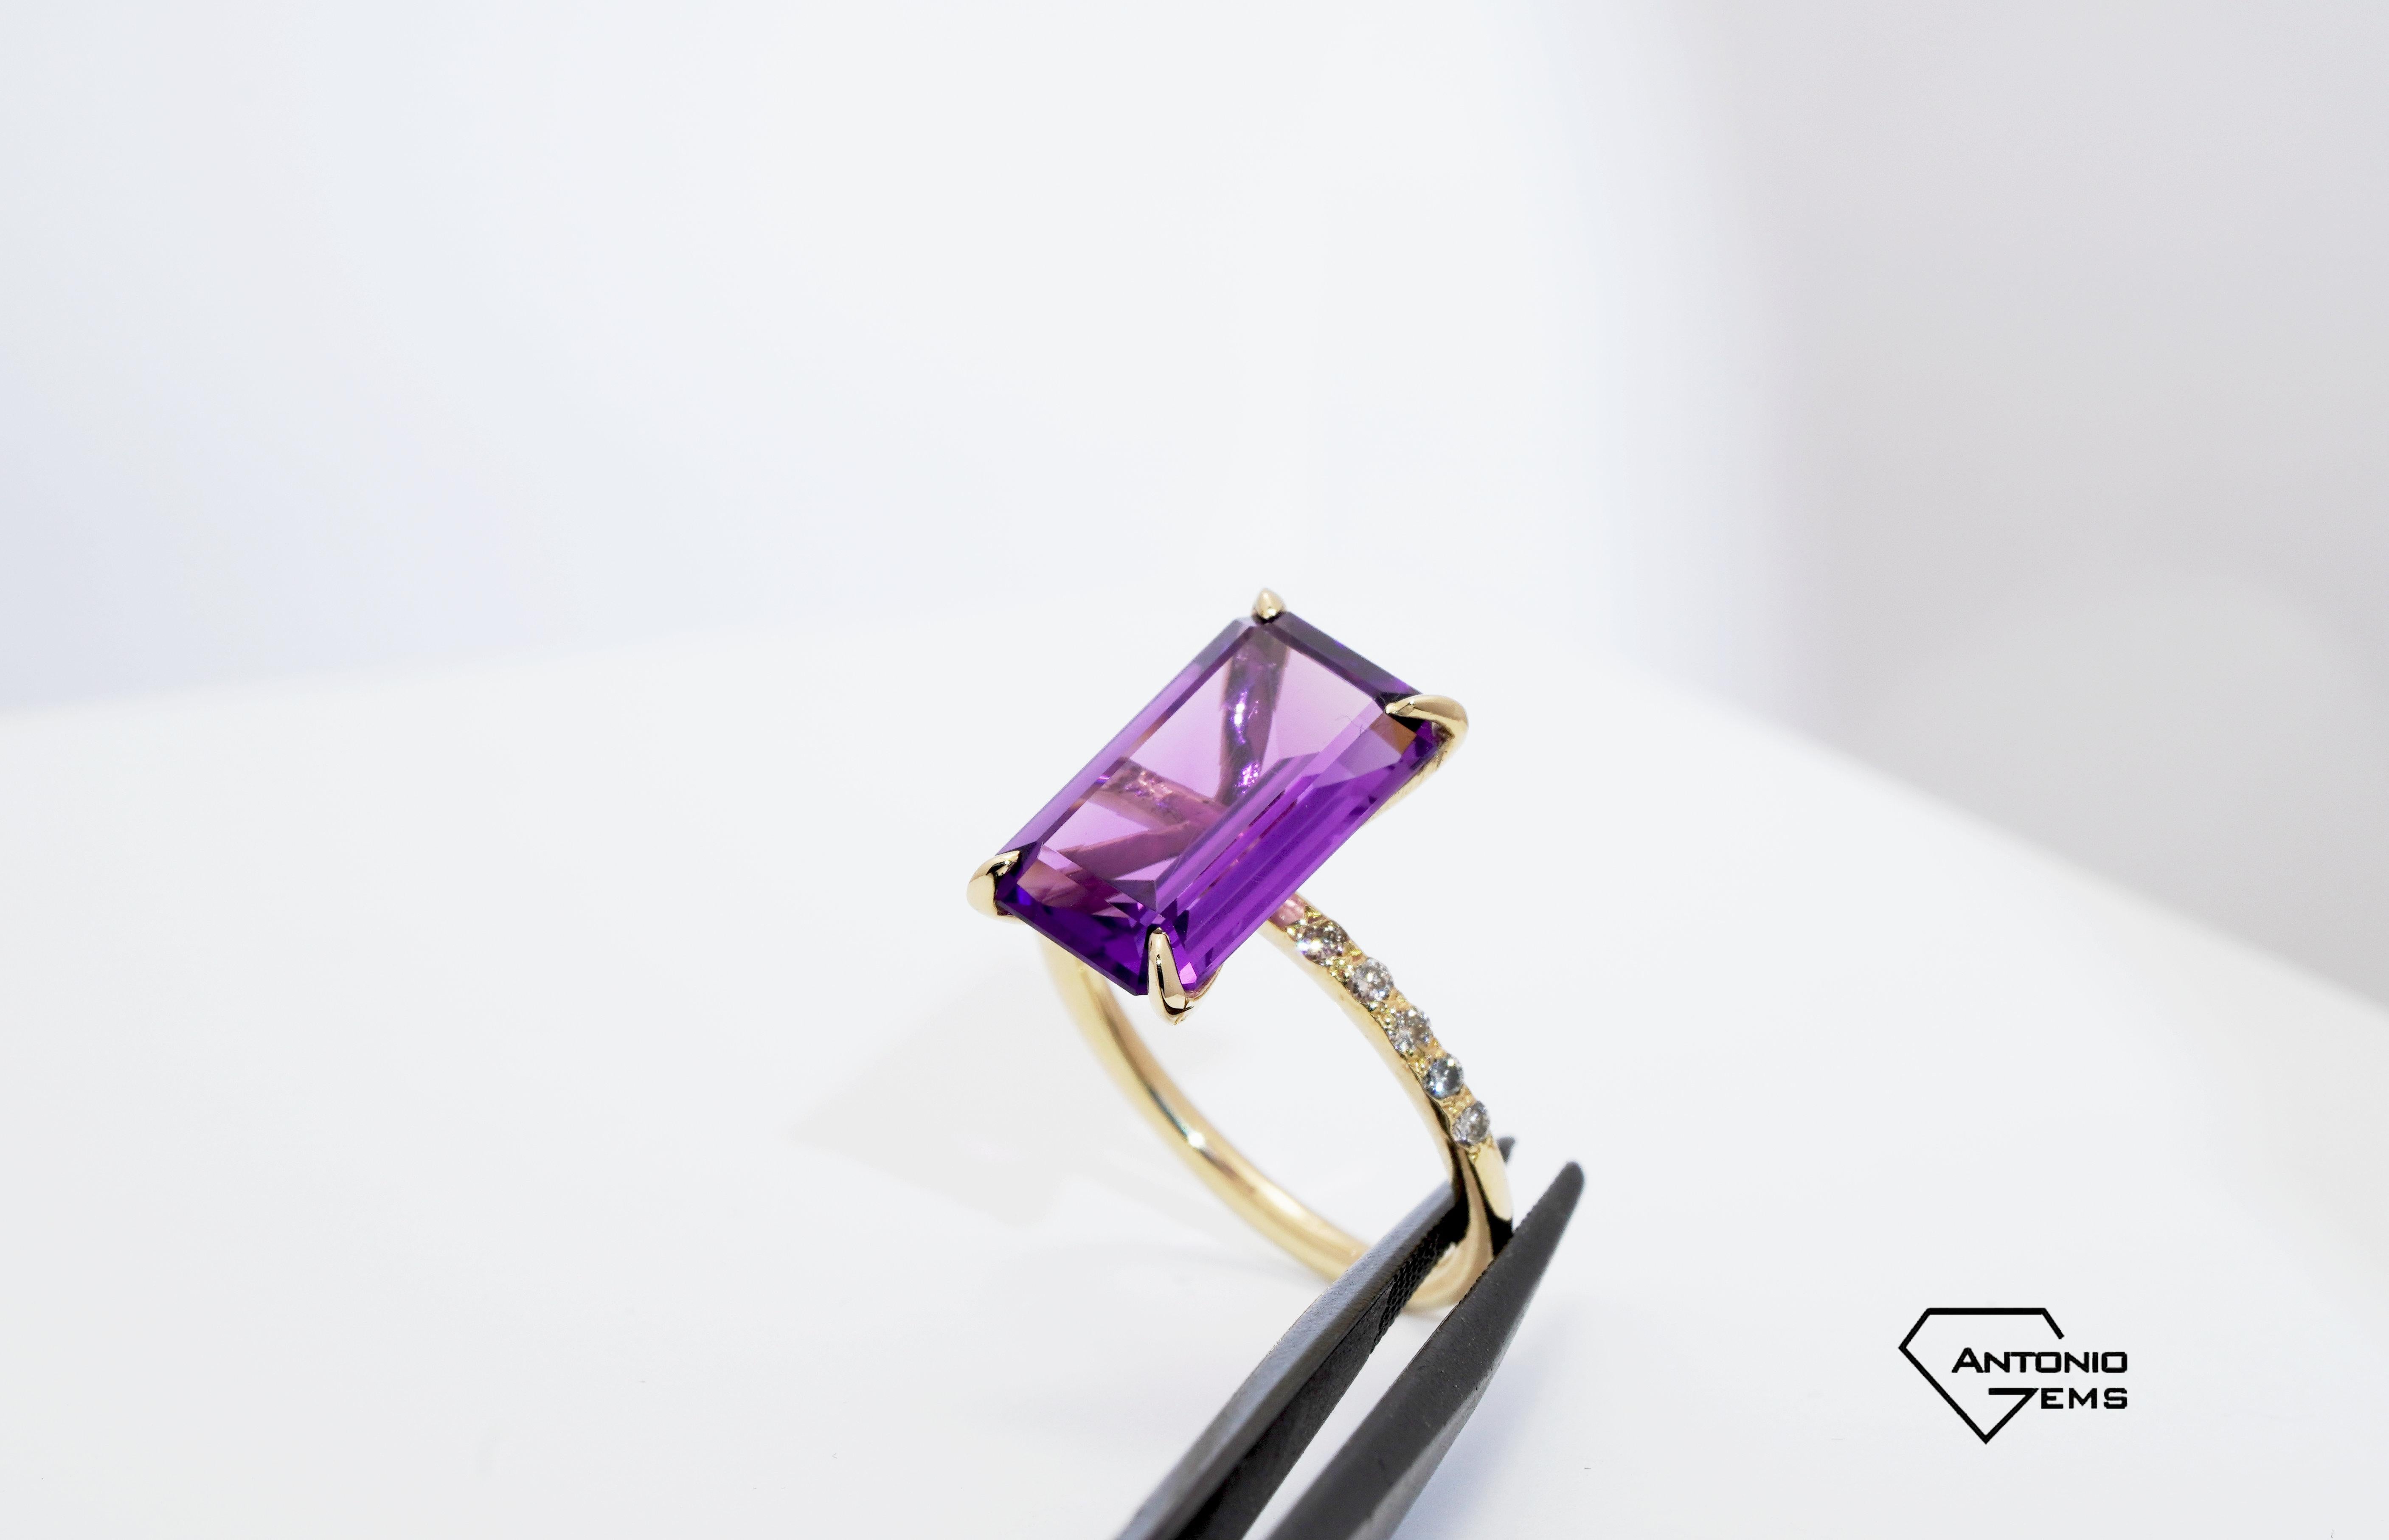 14 kt Gold Ring with Amethyst and Diamonds
Gold color: Yellow
Ring size: 5 1/2 US
Total weight: 2.80 grams

Set with:
- Aquamarine
Cut: Emerald
Color: Purple

- 10 Diamonds of total: 0.12 ct
Cut: Brilliant